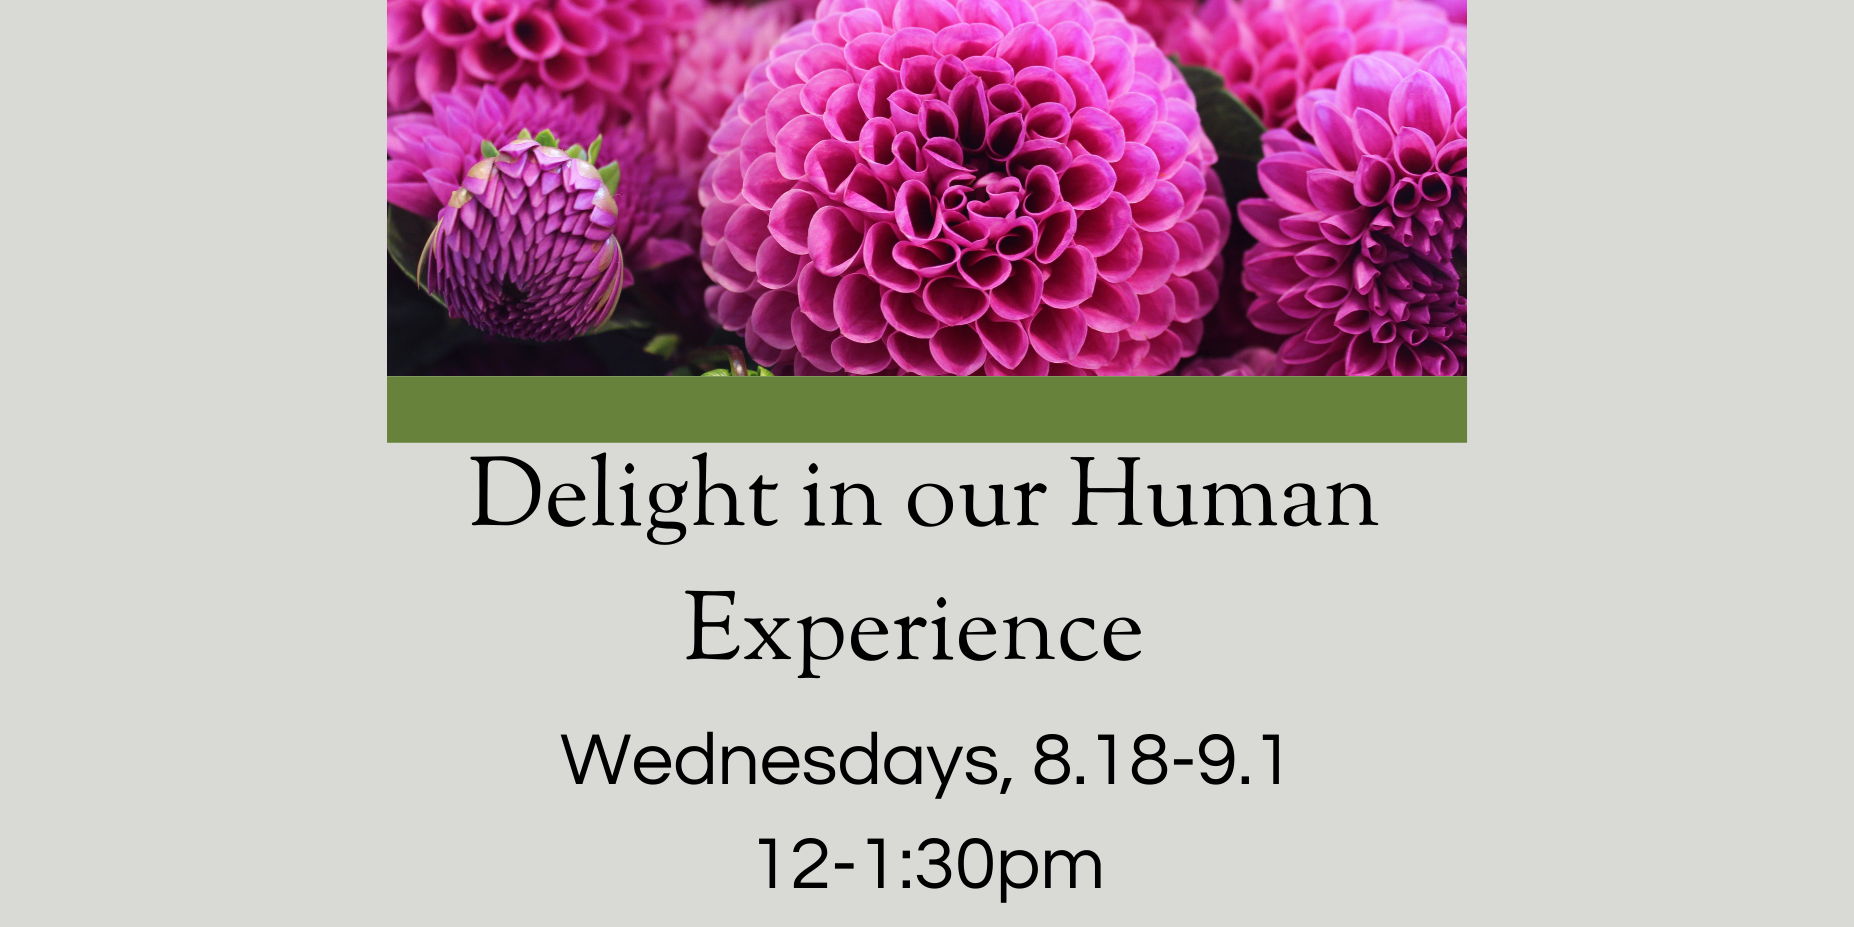 Delight & Our Human Experience promotional image